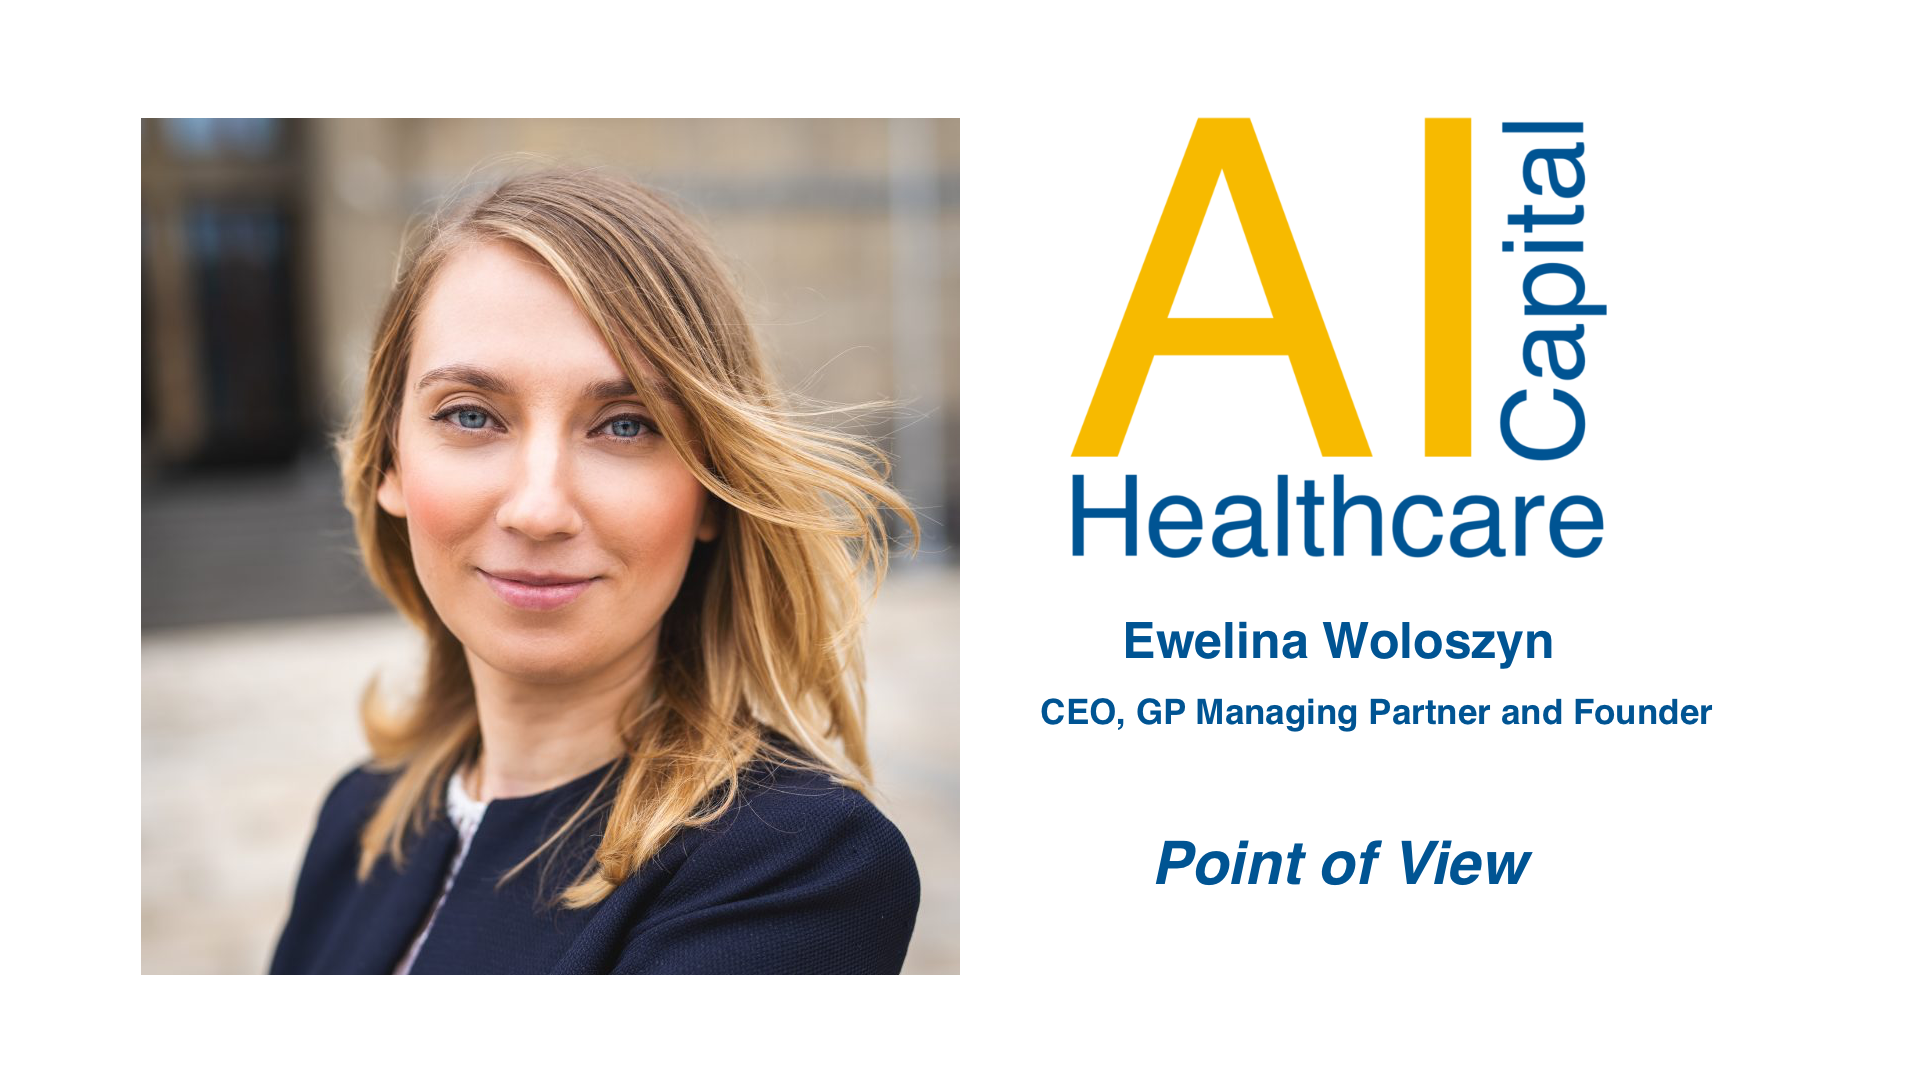 Unconscious Bias in the Healthcare Industry and How AI Investments Could Address It